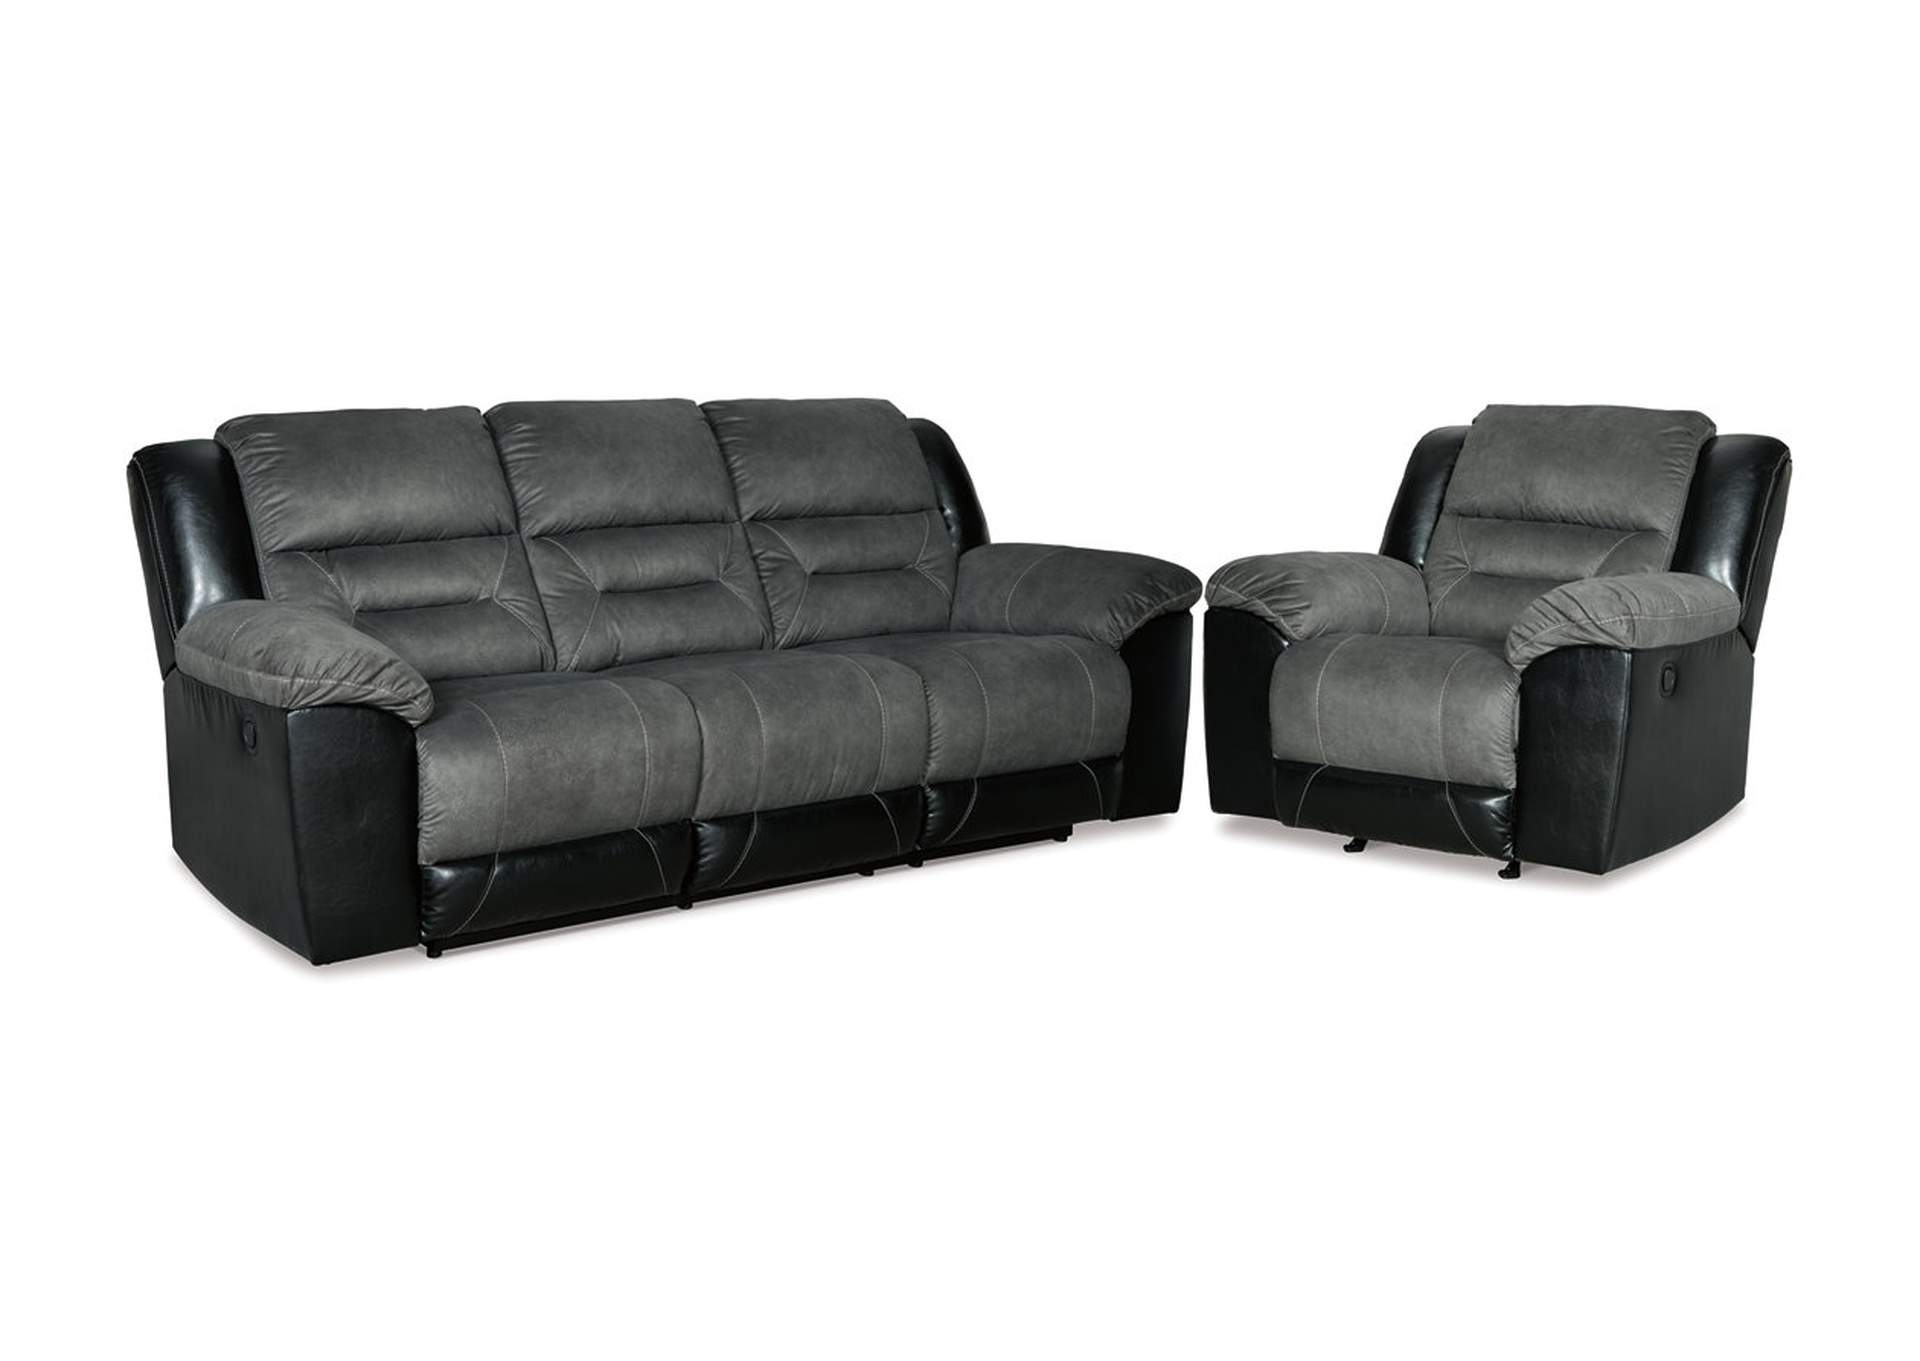 Earhart Sofa and Recliner,Signature Design By Ashley